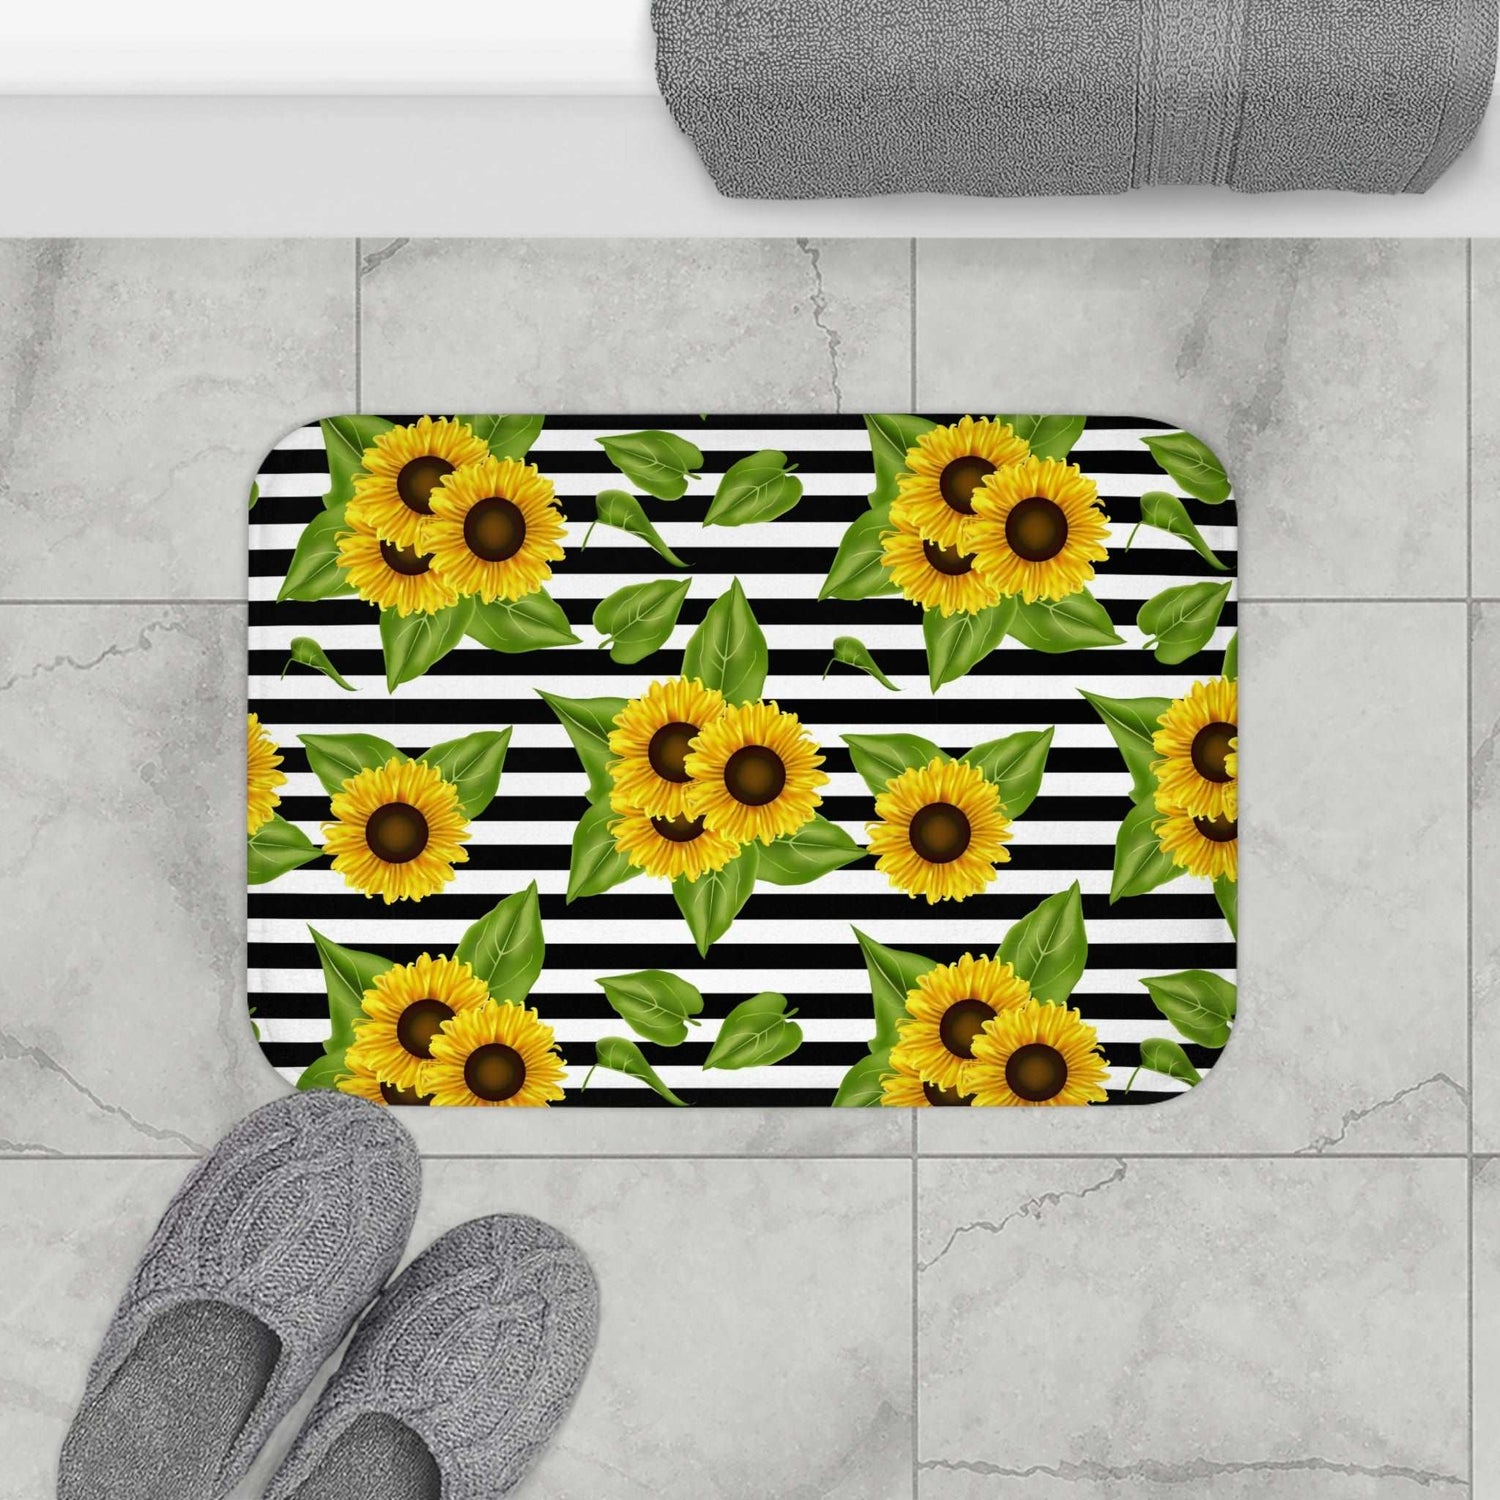 Sunny Splendor: Bath Mat Sunflowers Bring Cheer to Black and White Spaces Home-clothes-jewelry